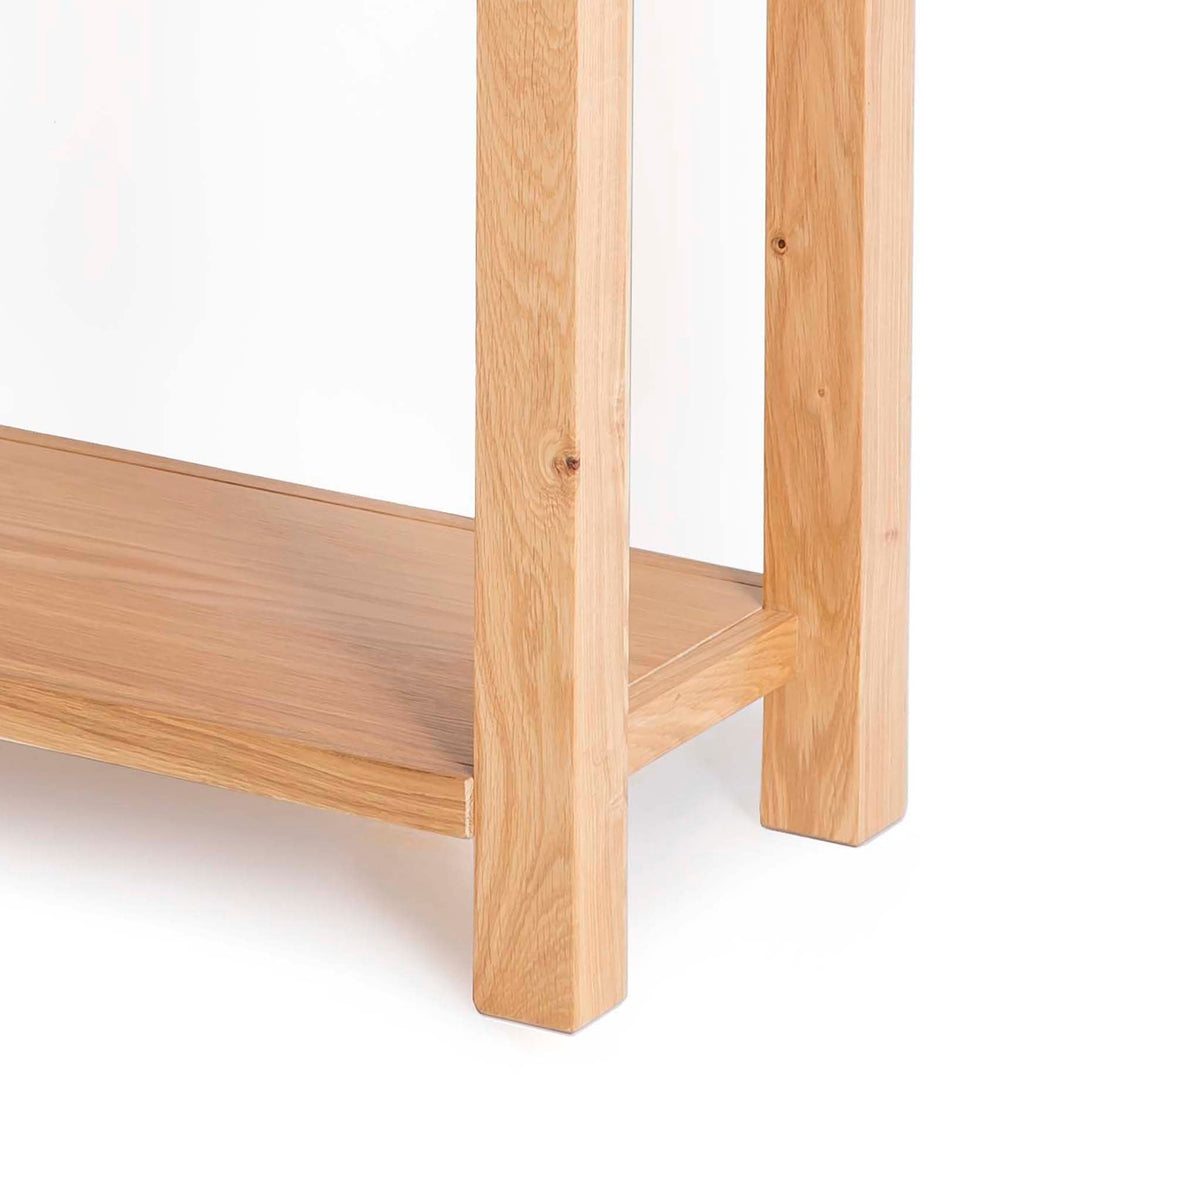 Abbey Light Oak Console Table - Close up of legs and lower shelf on console table